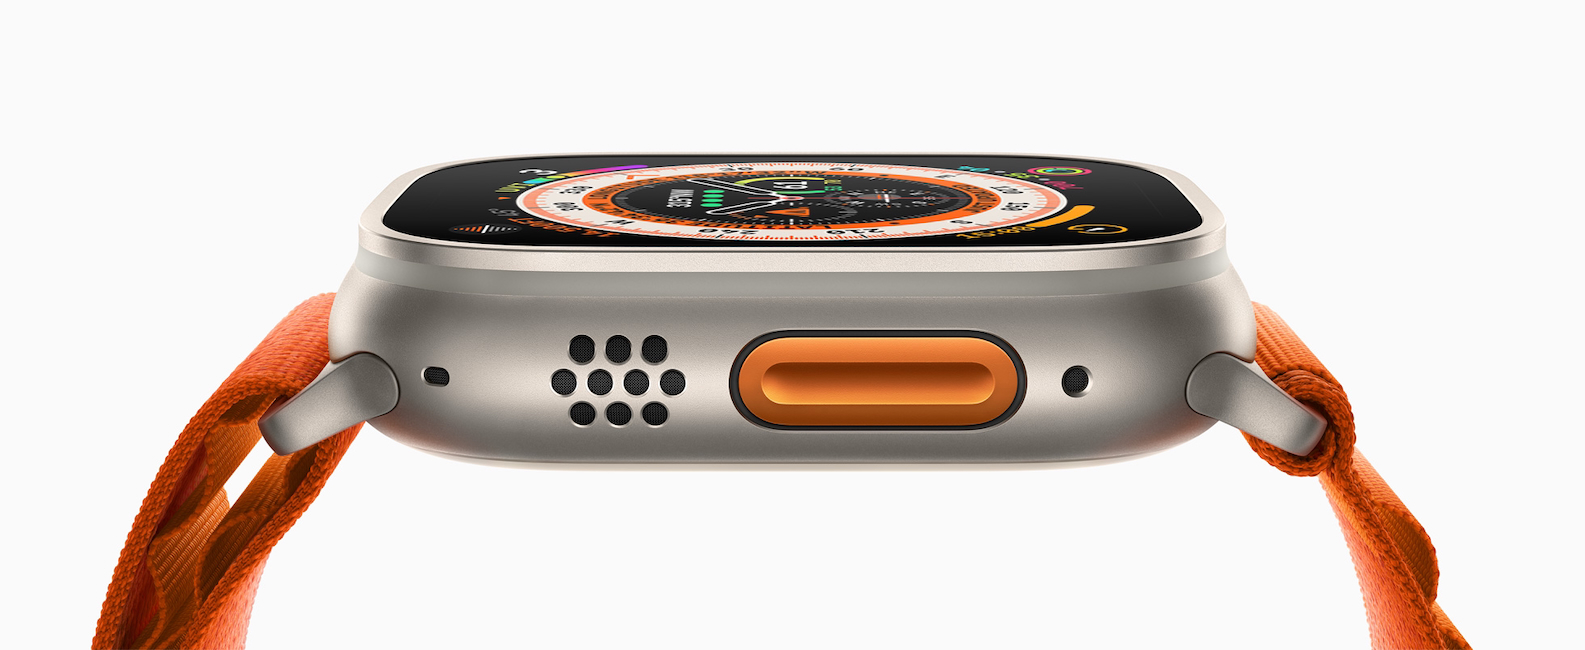 Apple Watch Ultra - Image courtesy of Apple